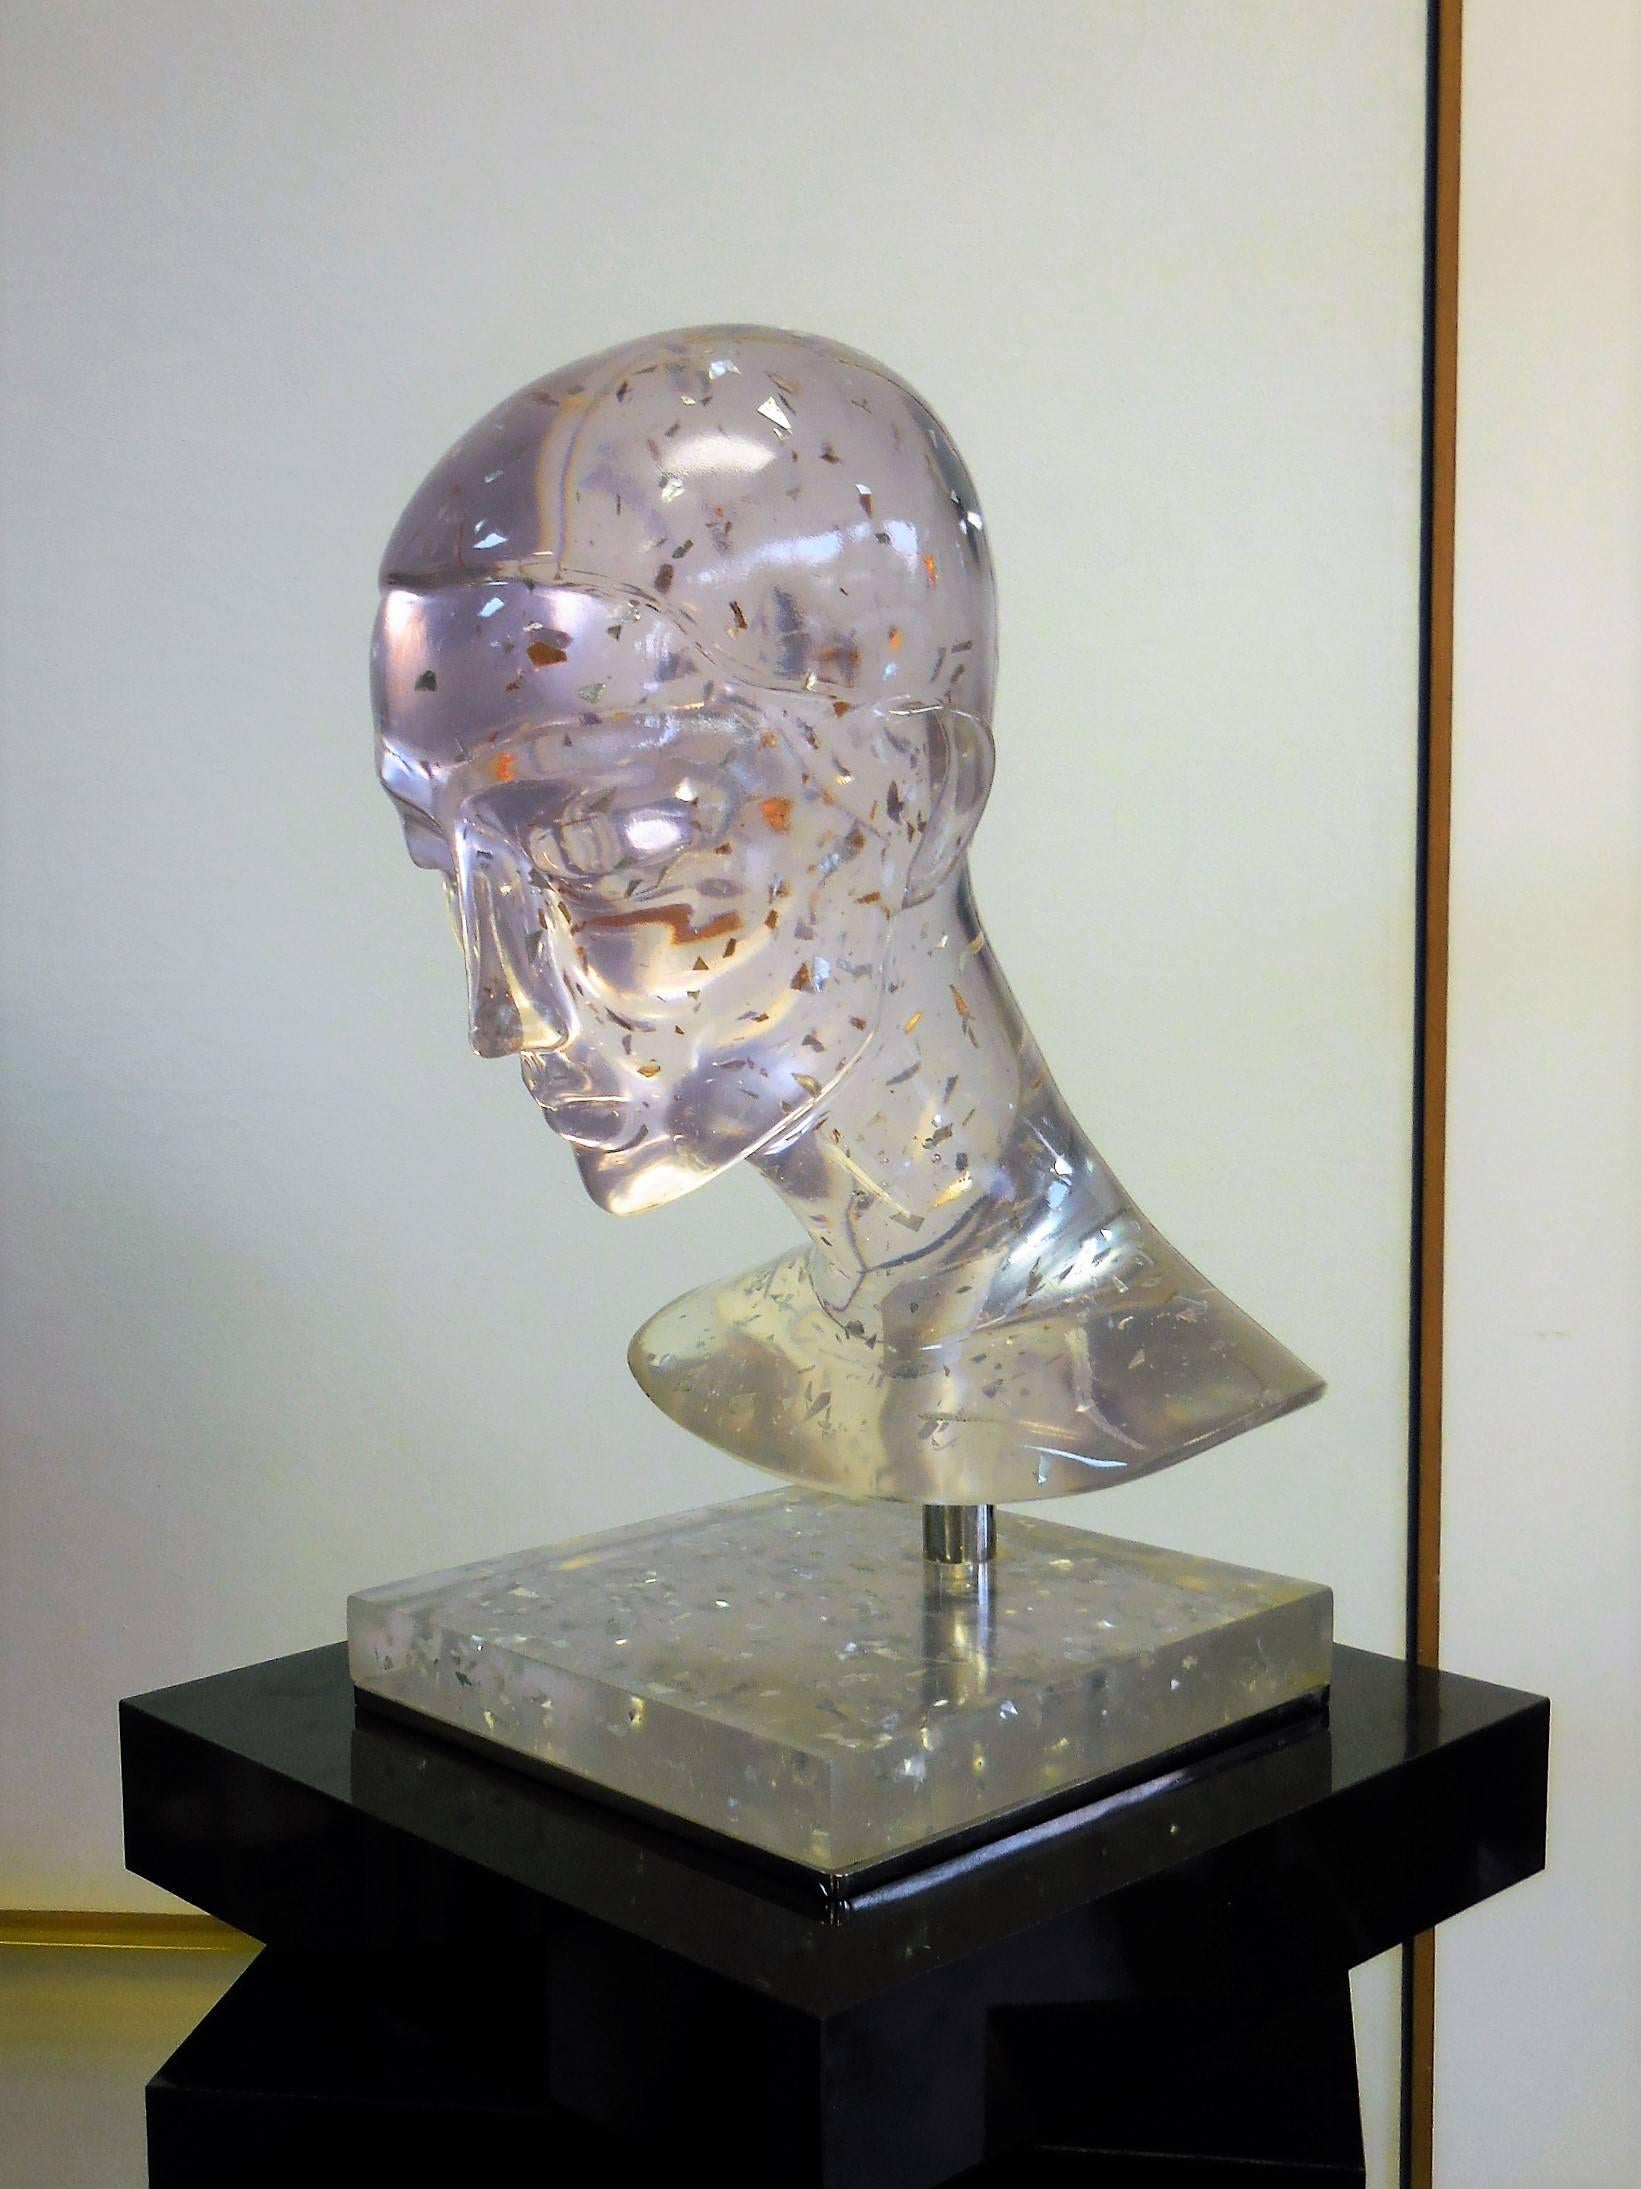 A large sculpture in clear resin with metal inclusions. Depicts the stylized head of a woman with Classic features. The head rest on a chrome base, included is a revolving black laminate pedestal. Sculpture without the pedestal measures 15.5